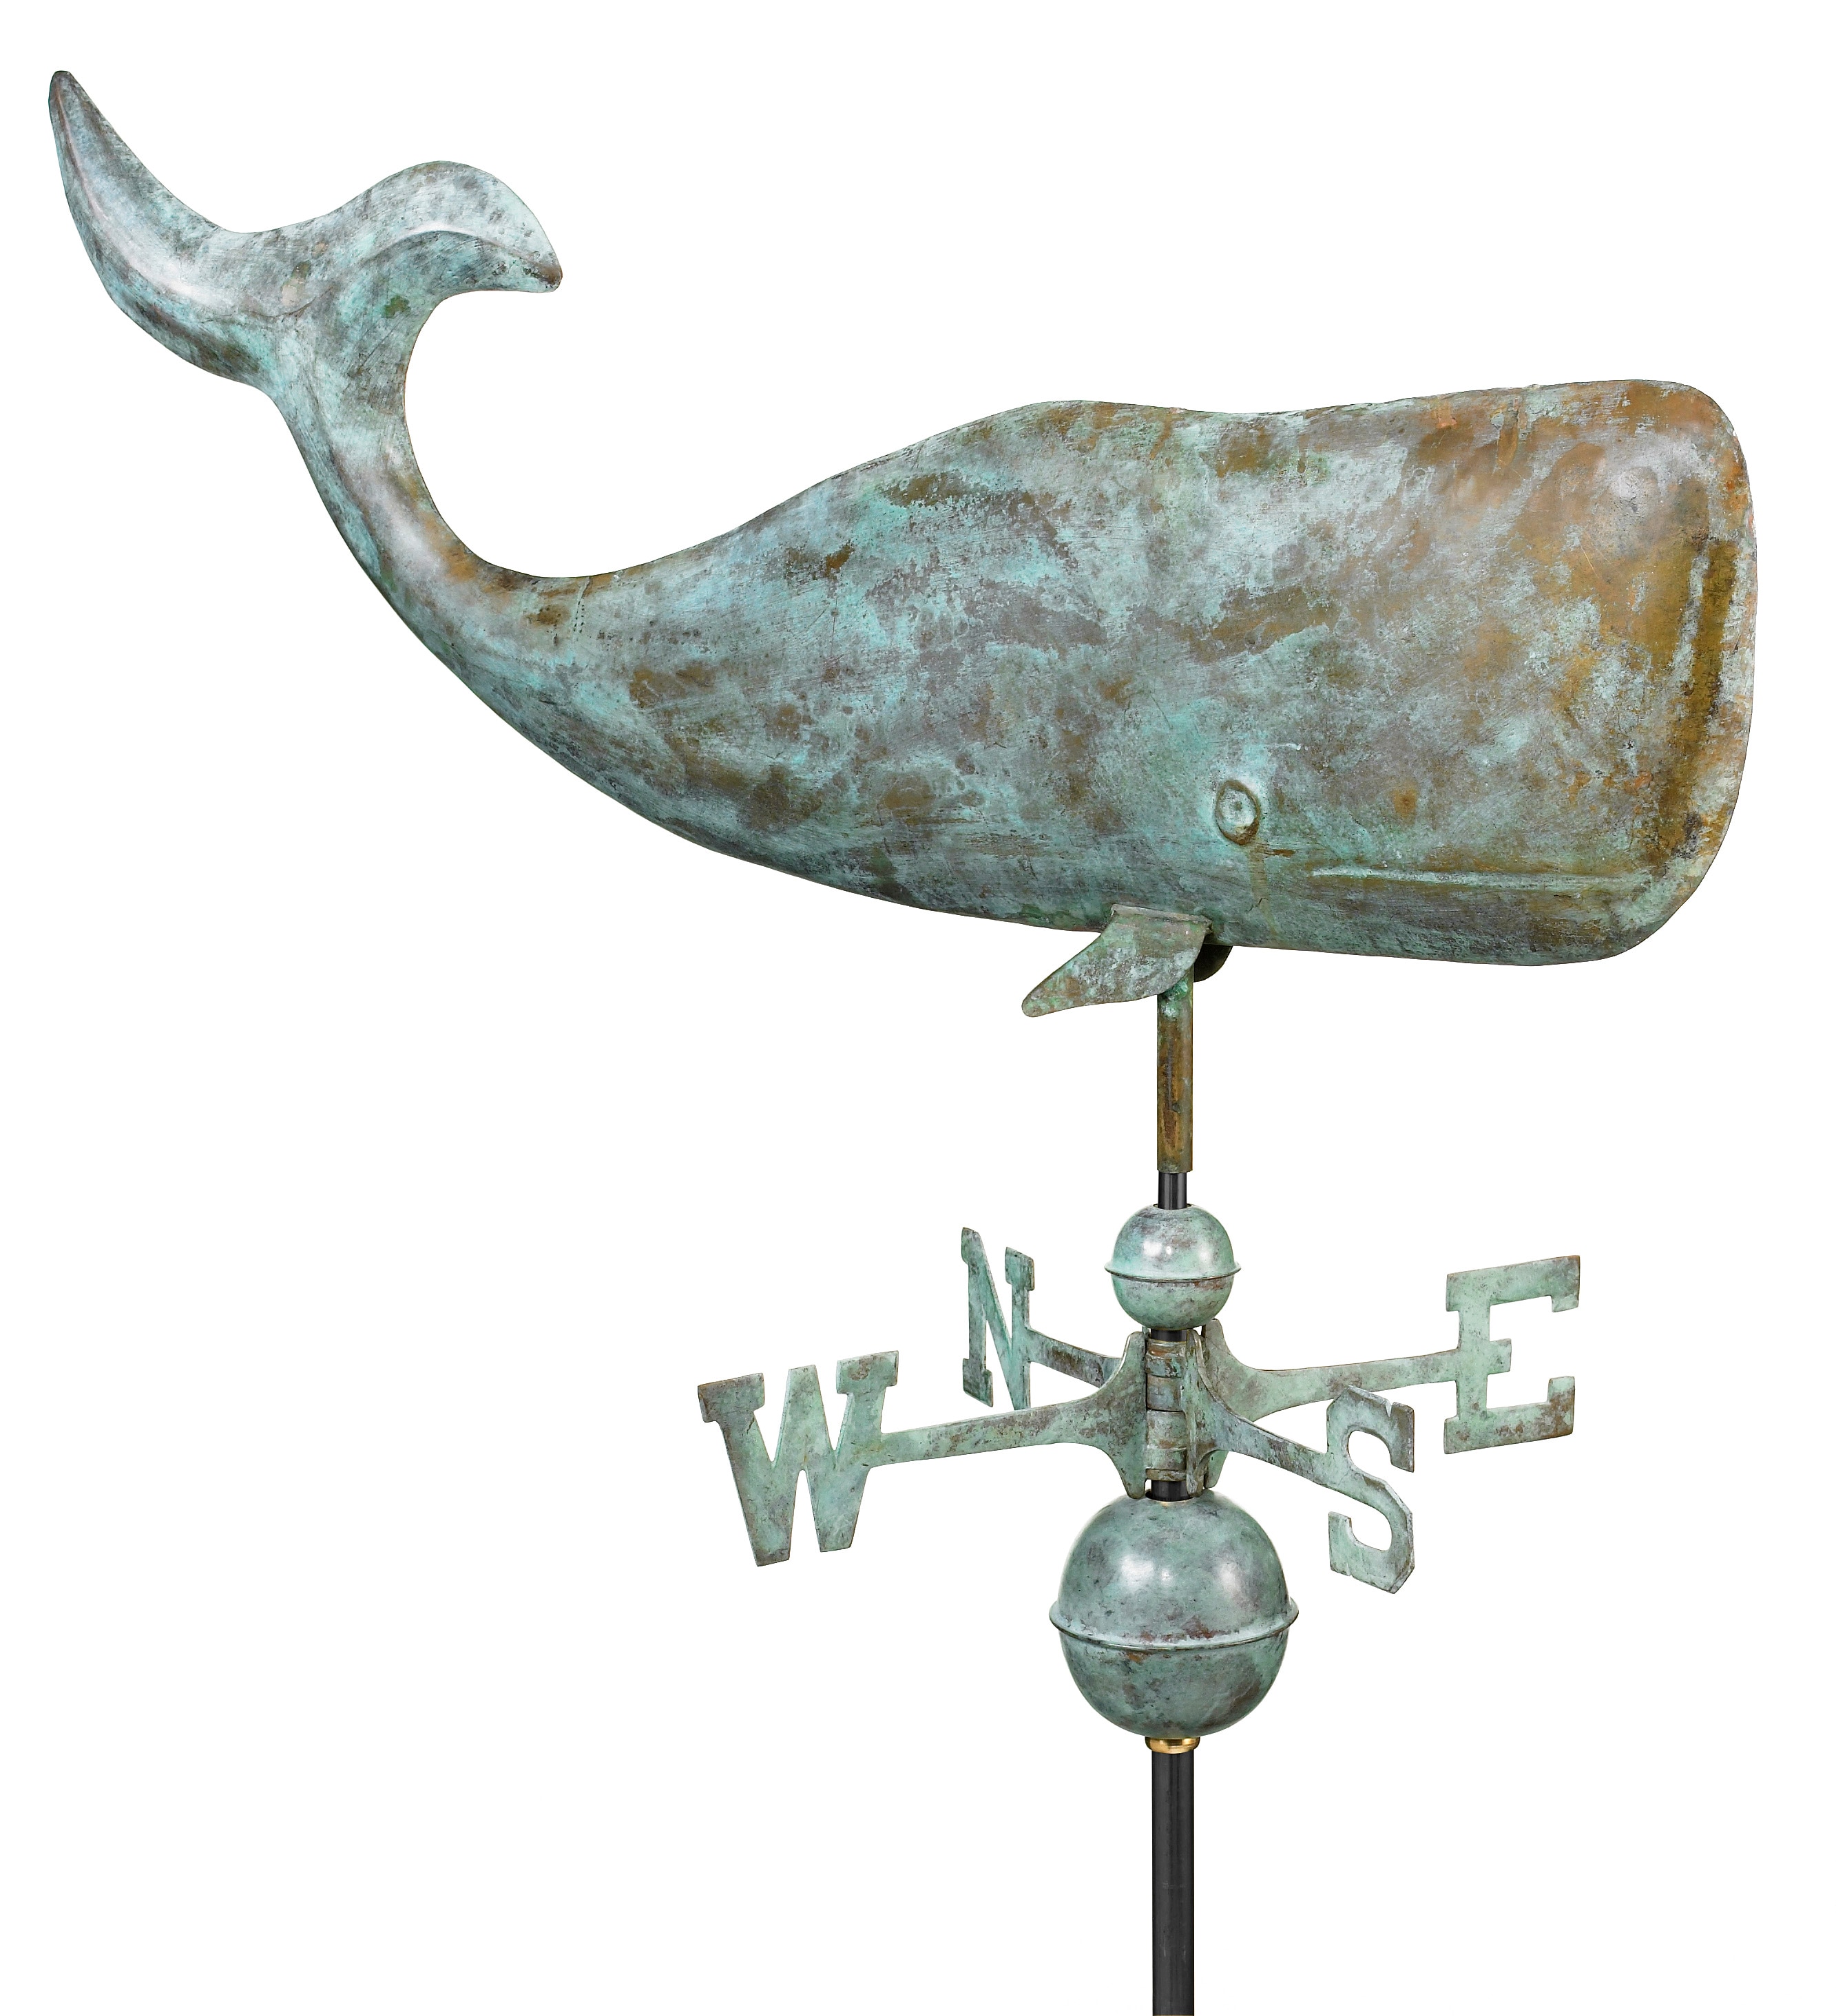 Grey Whale Metal Wall Art Decor Copper/Bronze Plated  14" long by 11 1/4" tall 